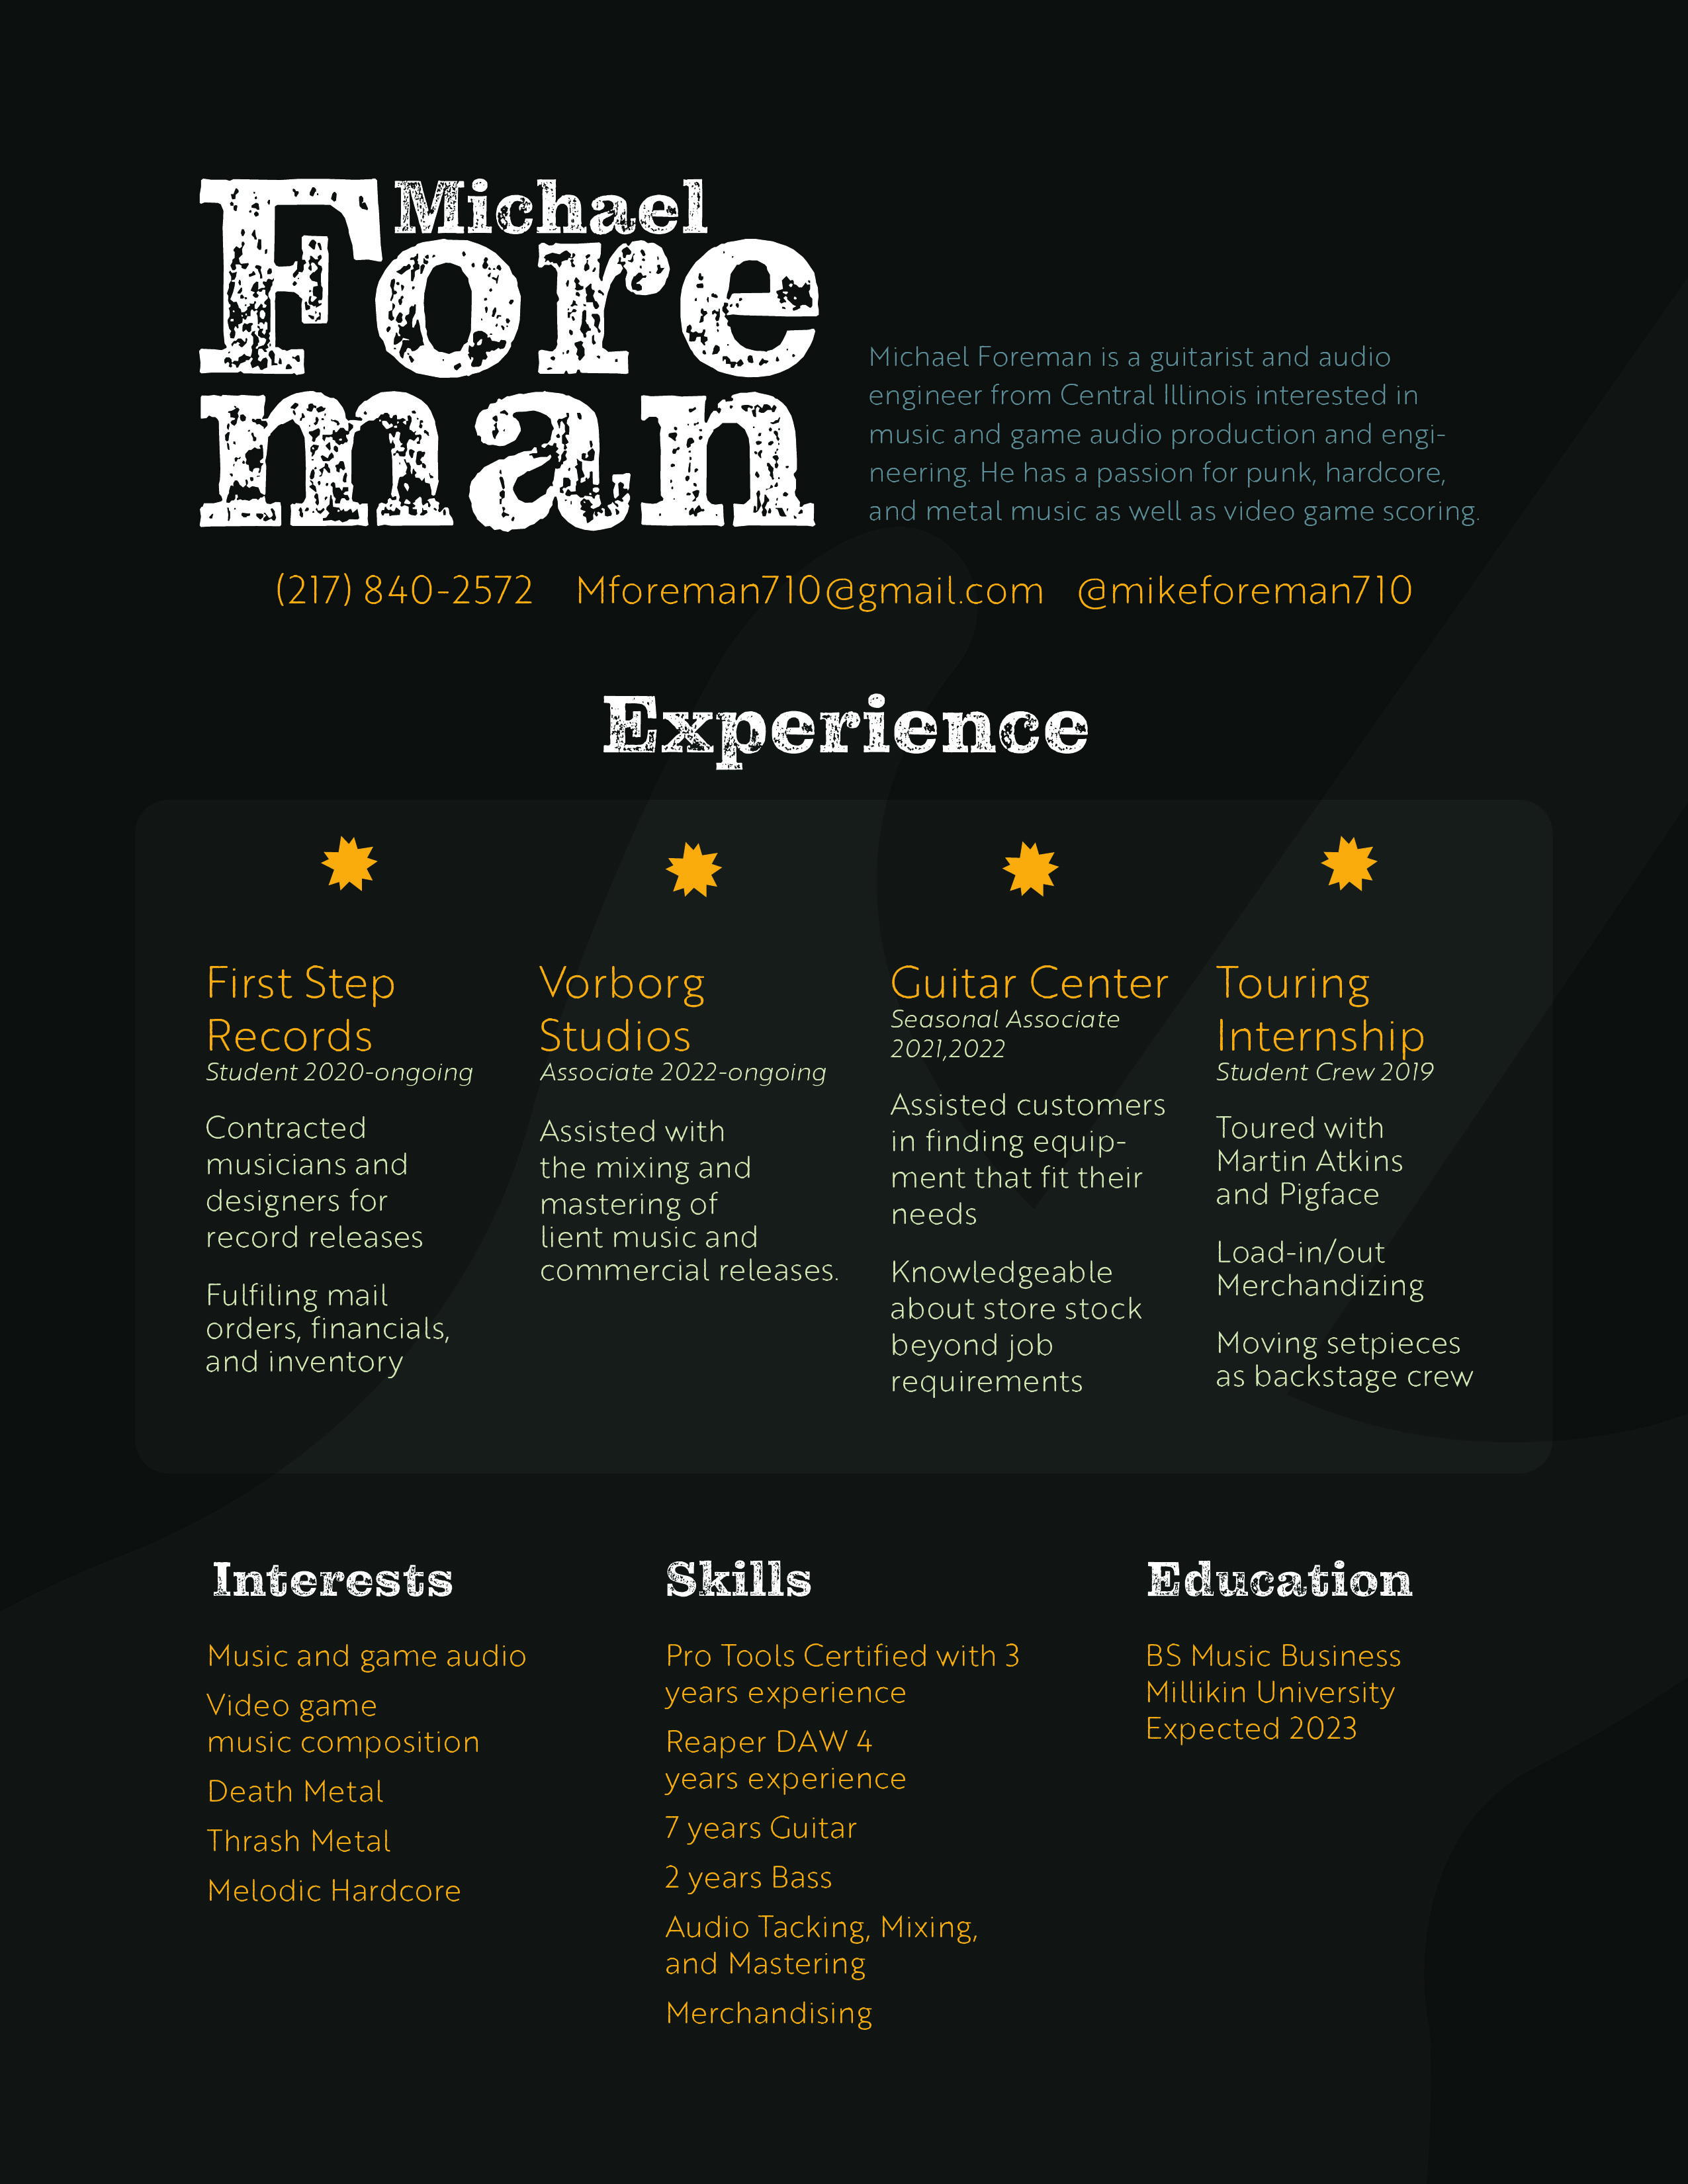 Resume Design for an audio engineer/musician based in East Central Illinois.